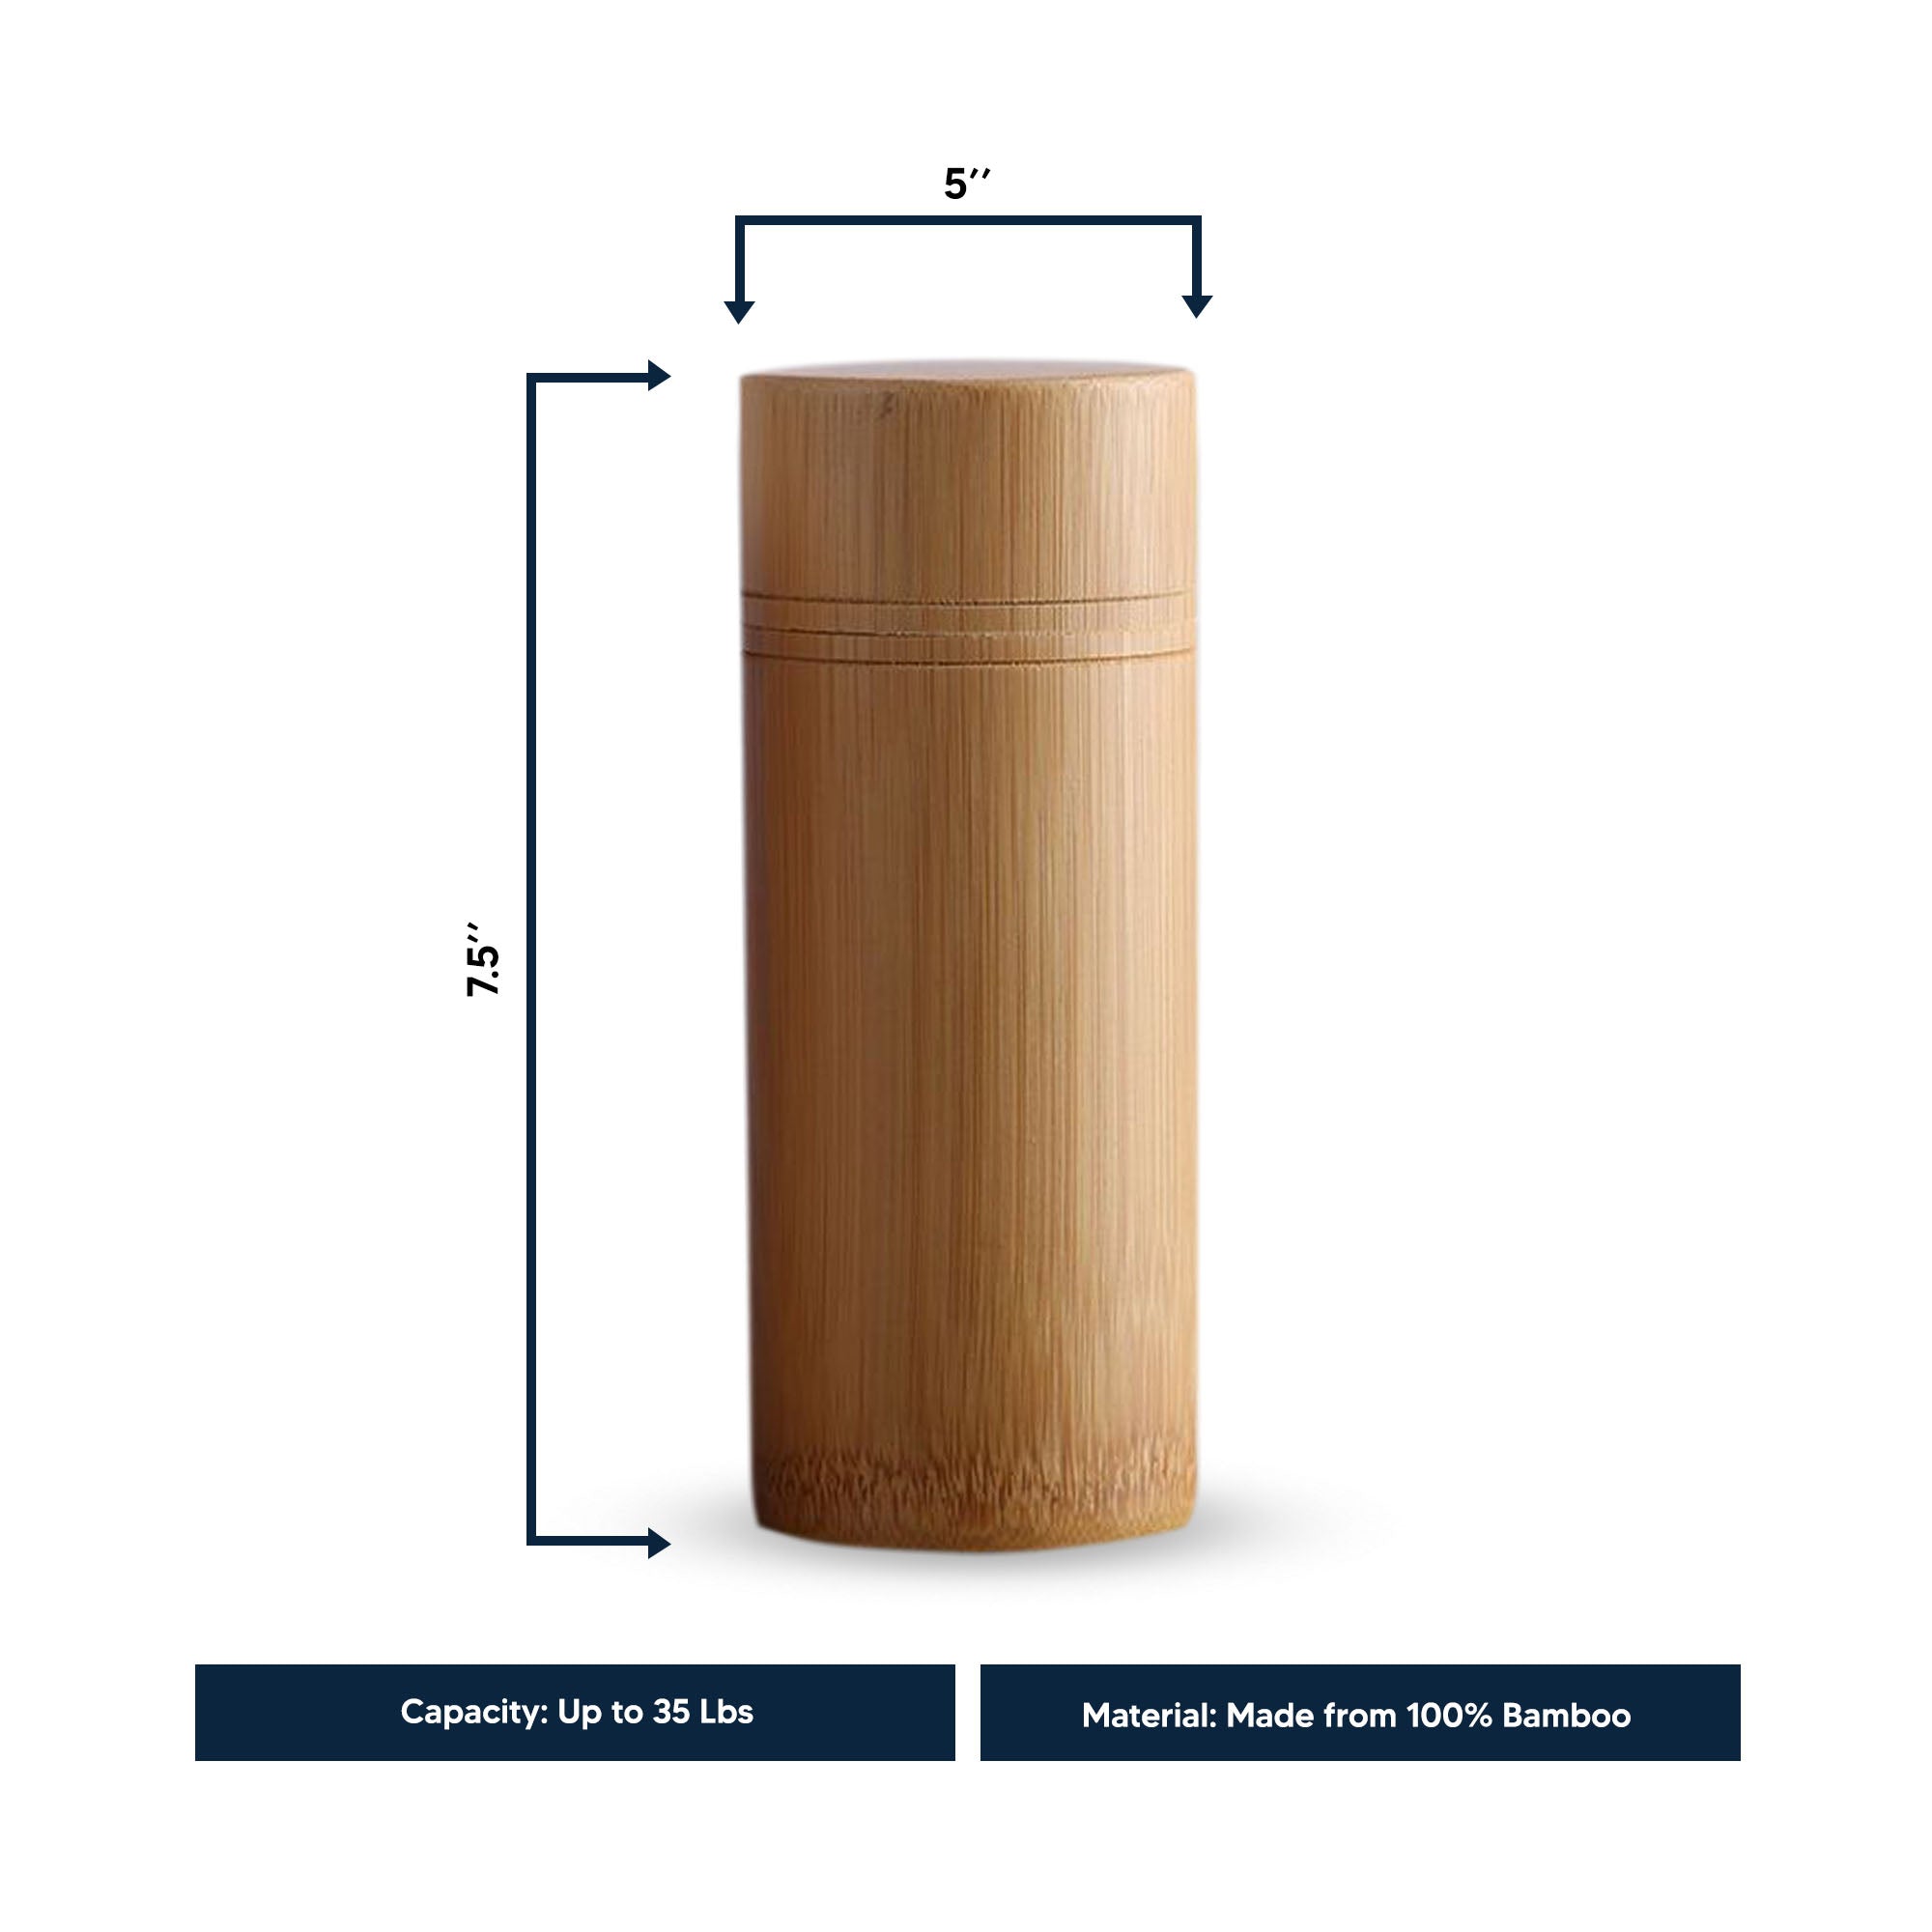 Personalized Custom Bamboo Tube Urn for Dog Pet Ashes: Environmentally Friendly Cremation Urn for Scattering, Burial, or Display Options - Pet Size up to 35 lbs